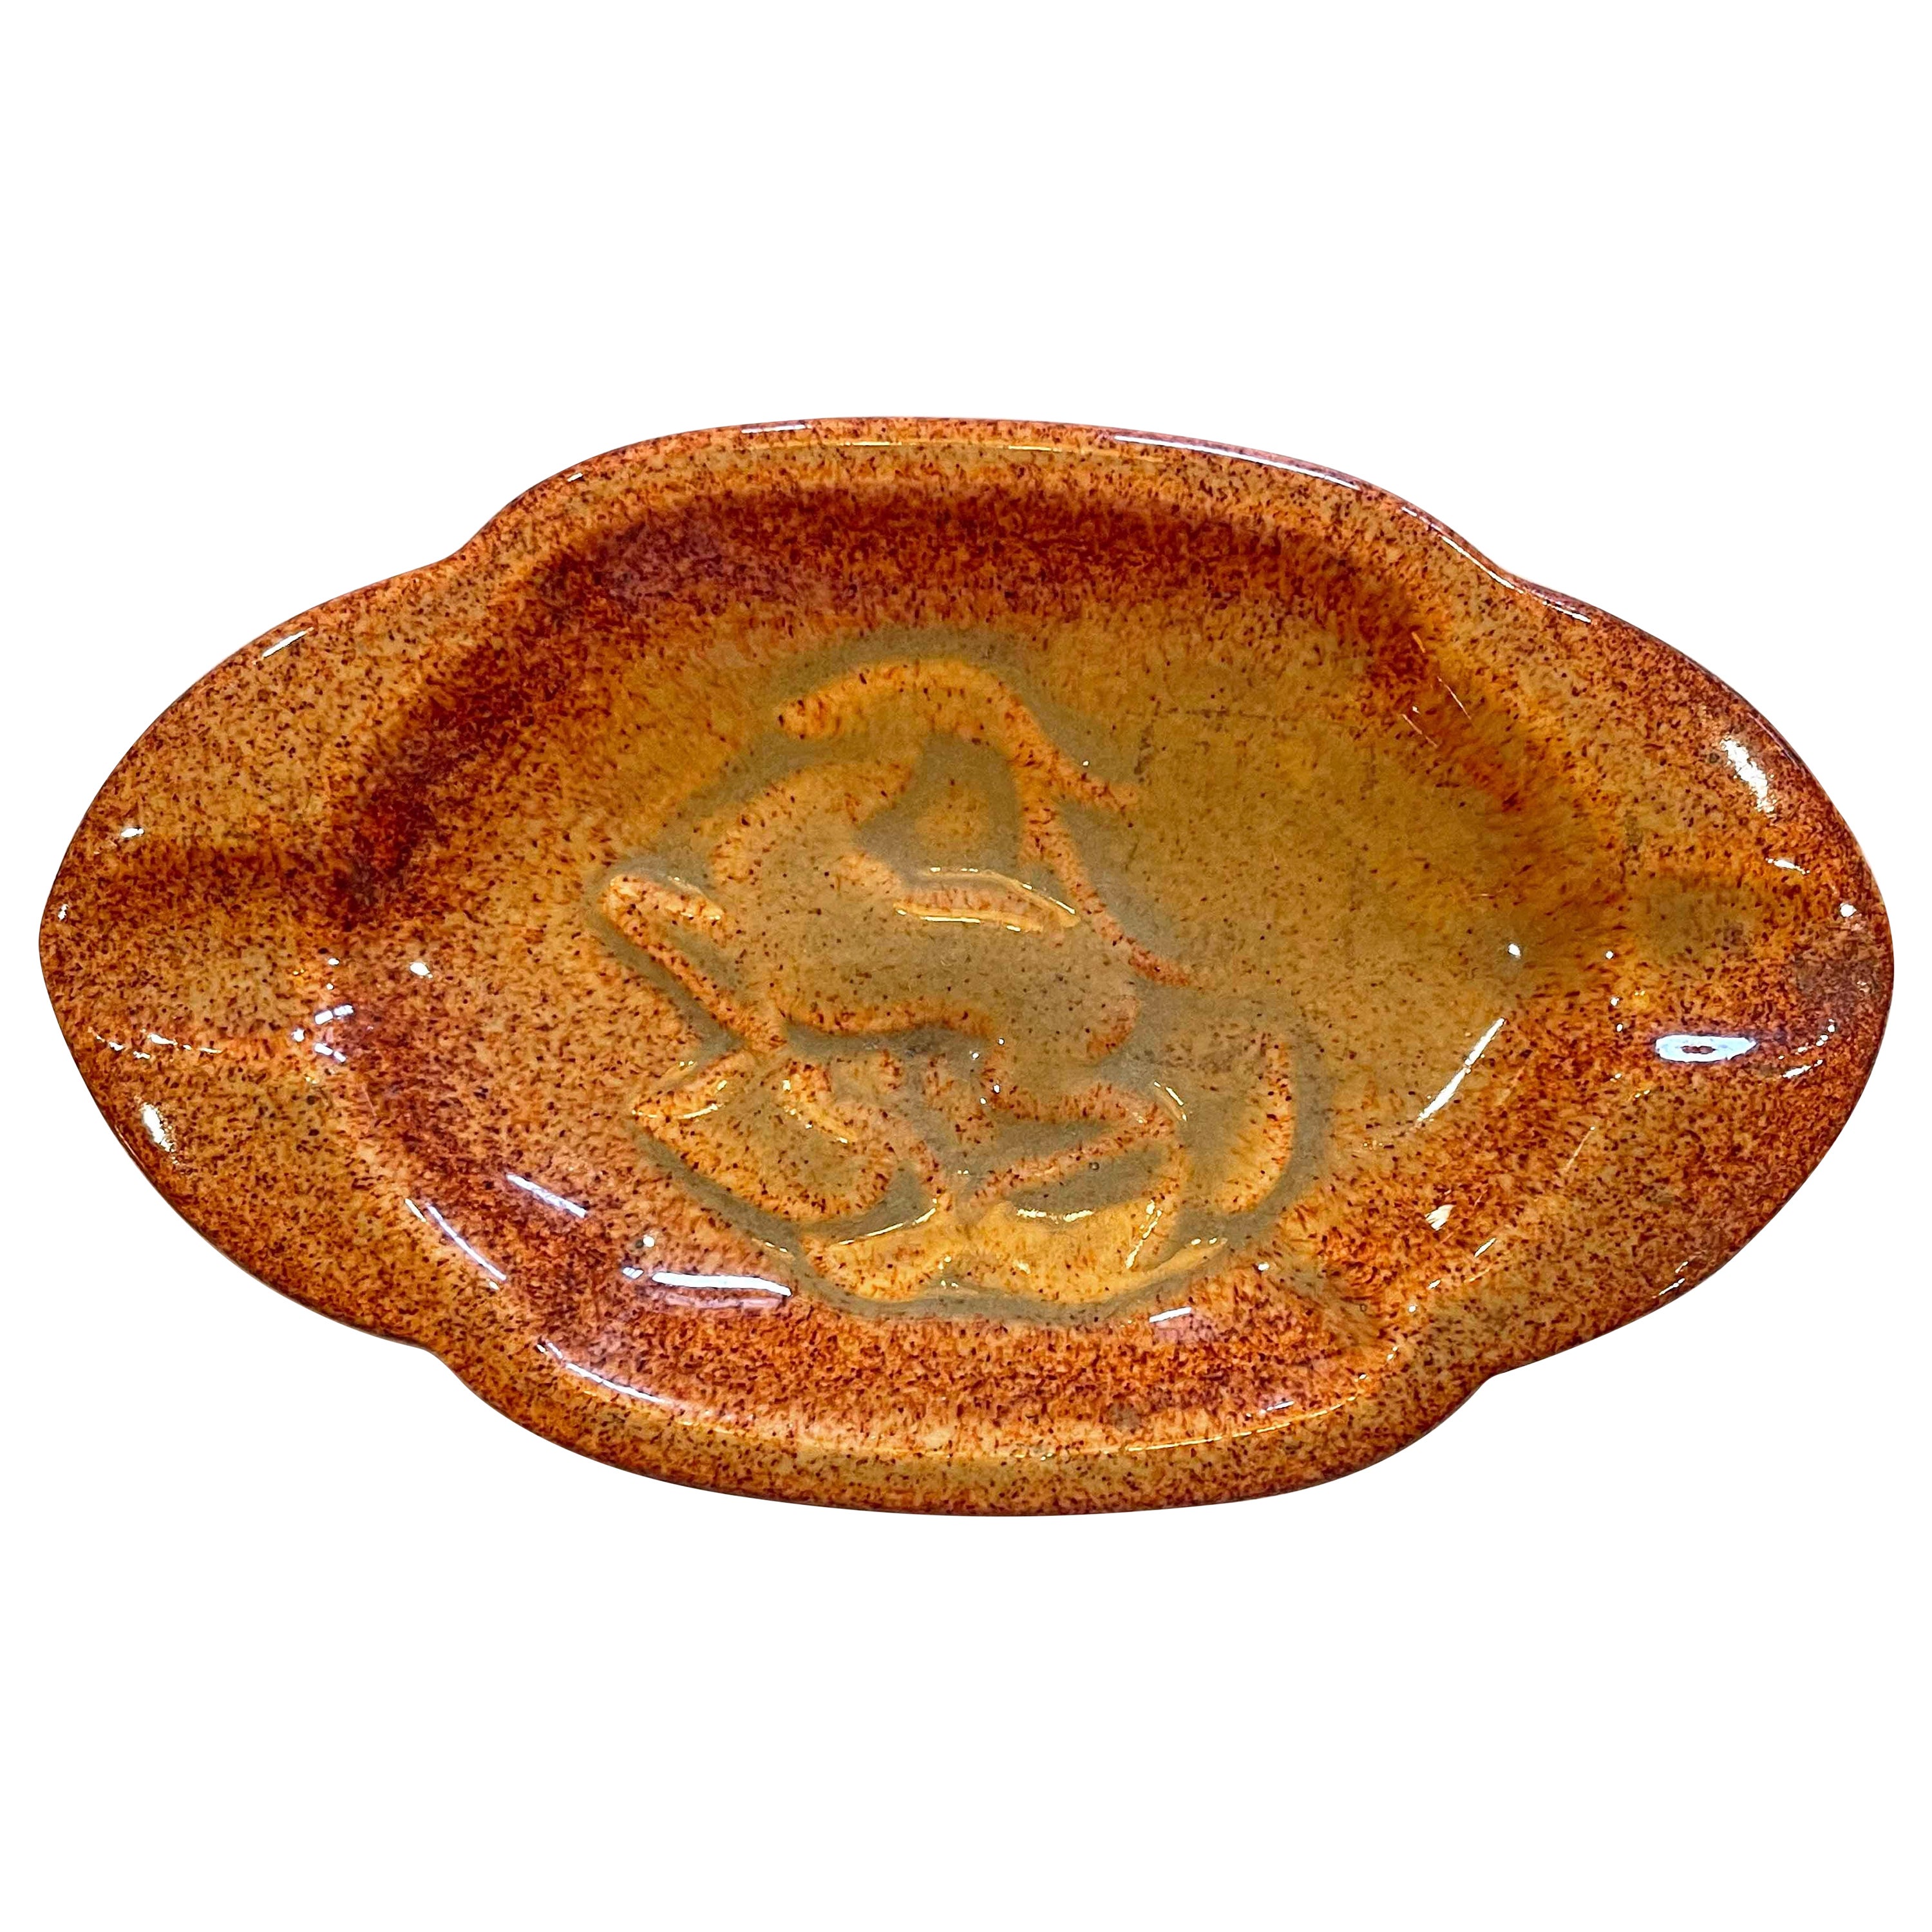 "Leaping Antelope Dish", Rare, Early work by Waylande Gregory for Cowan For Sale